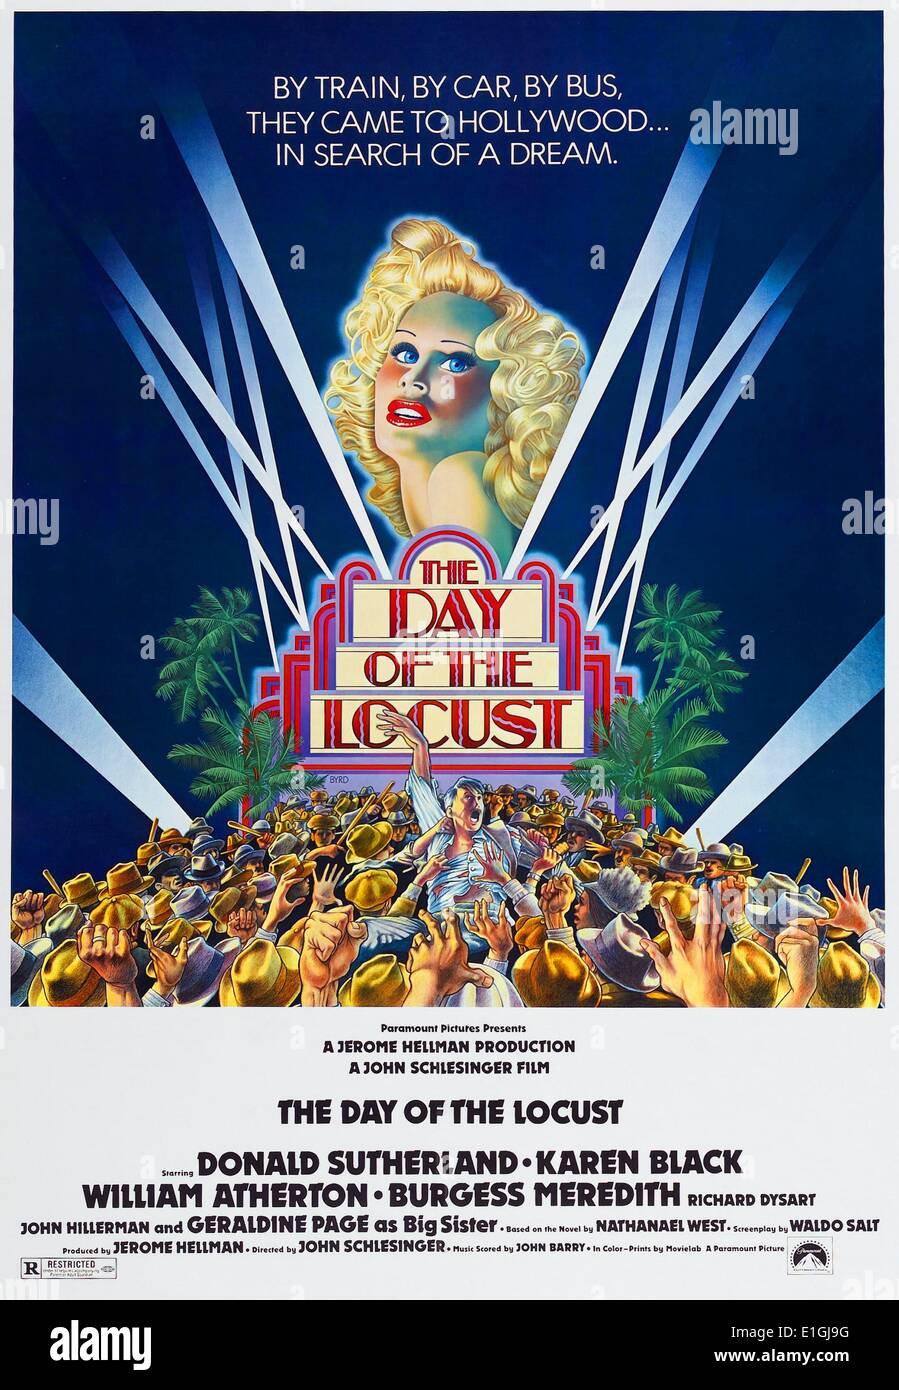 The Day of the Locust a 1975 American drama film starring Donald Sutherland and Karen Black. Stock Photo